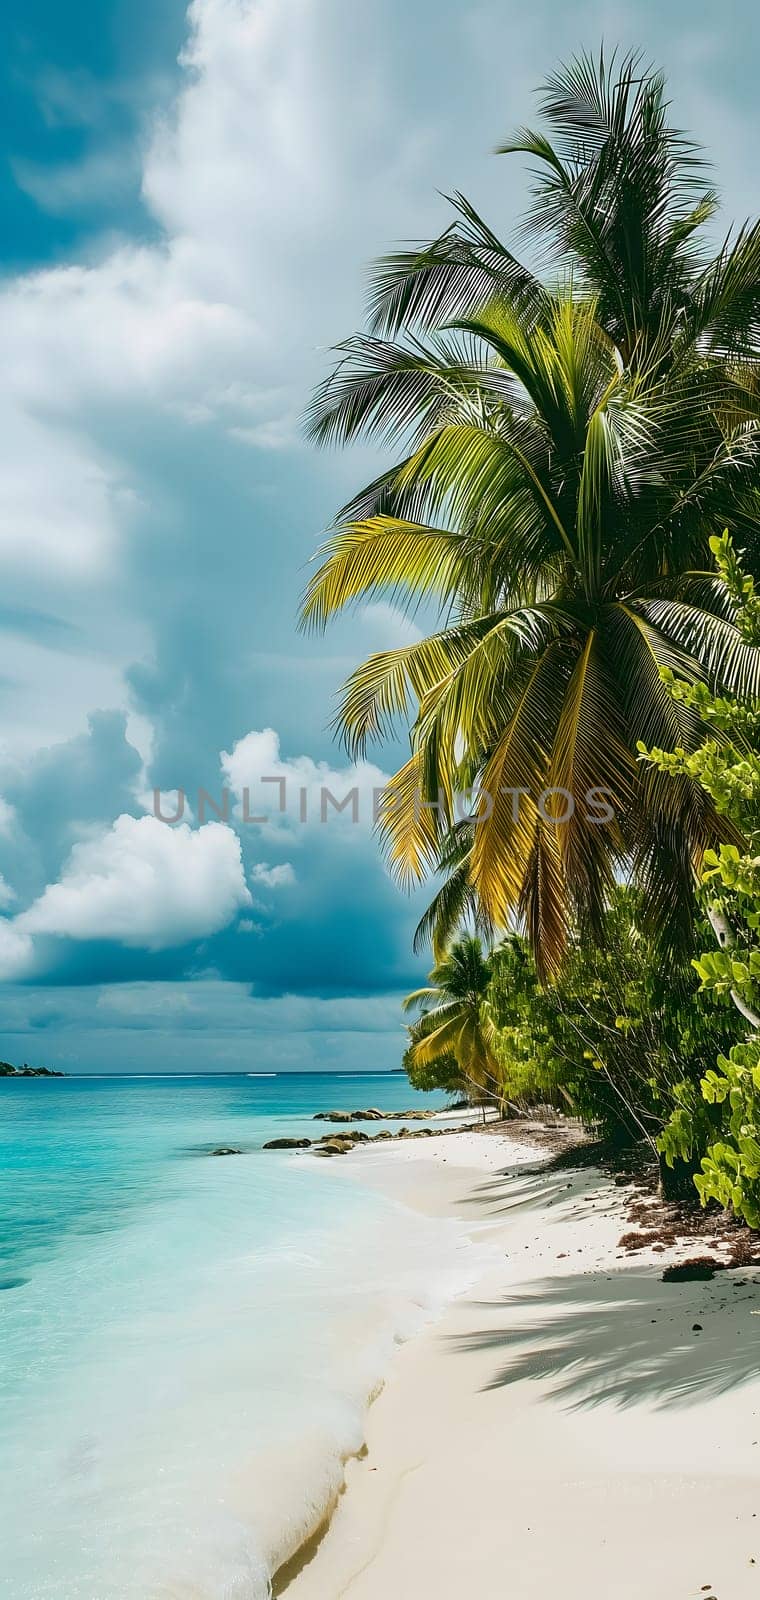 tropical beach view at cloudy stormy day with white sand, turquoise water and palm trees, neural network generated image by z1b